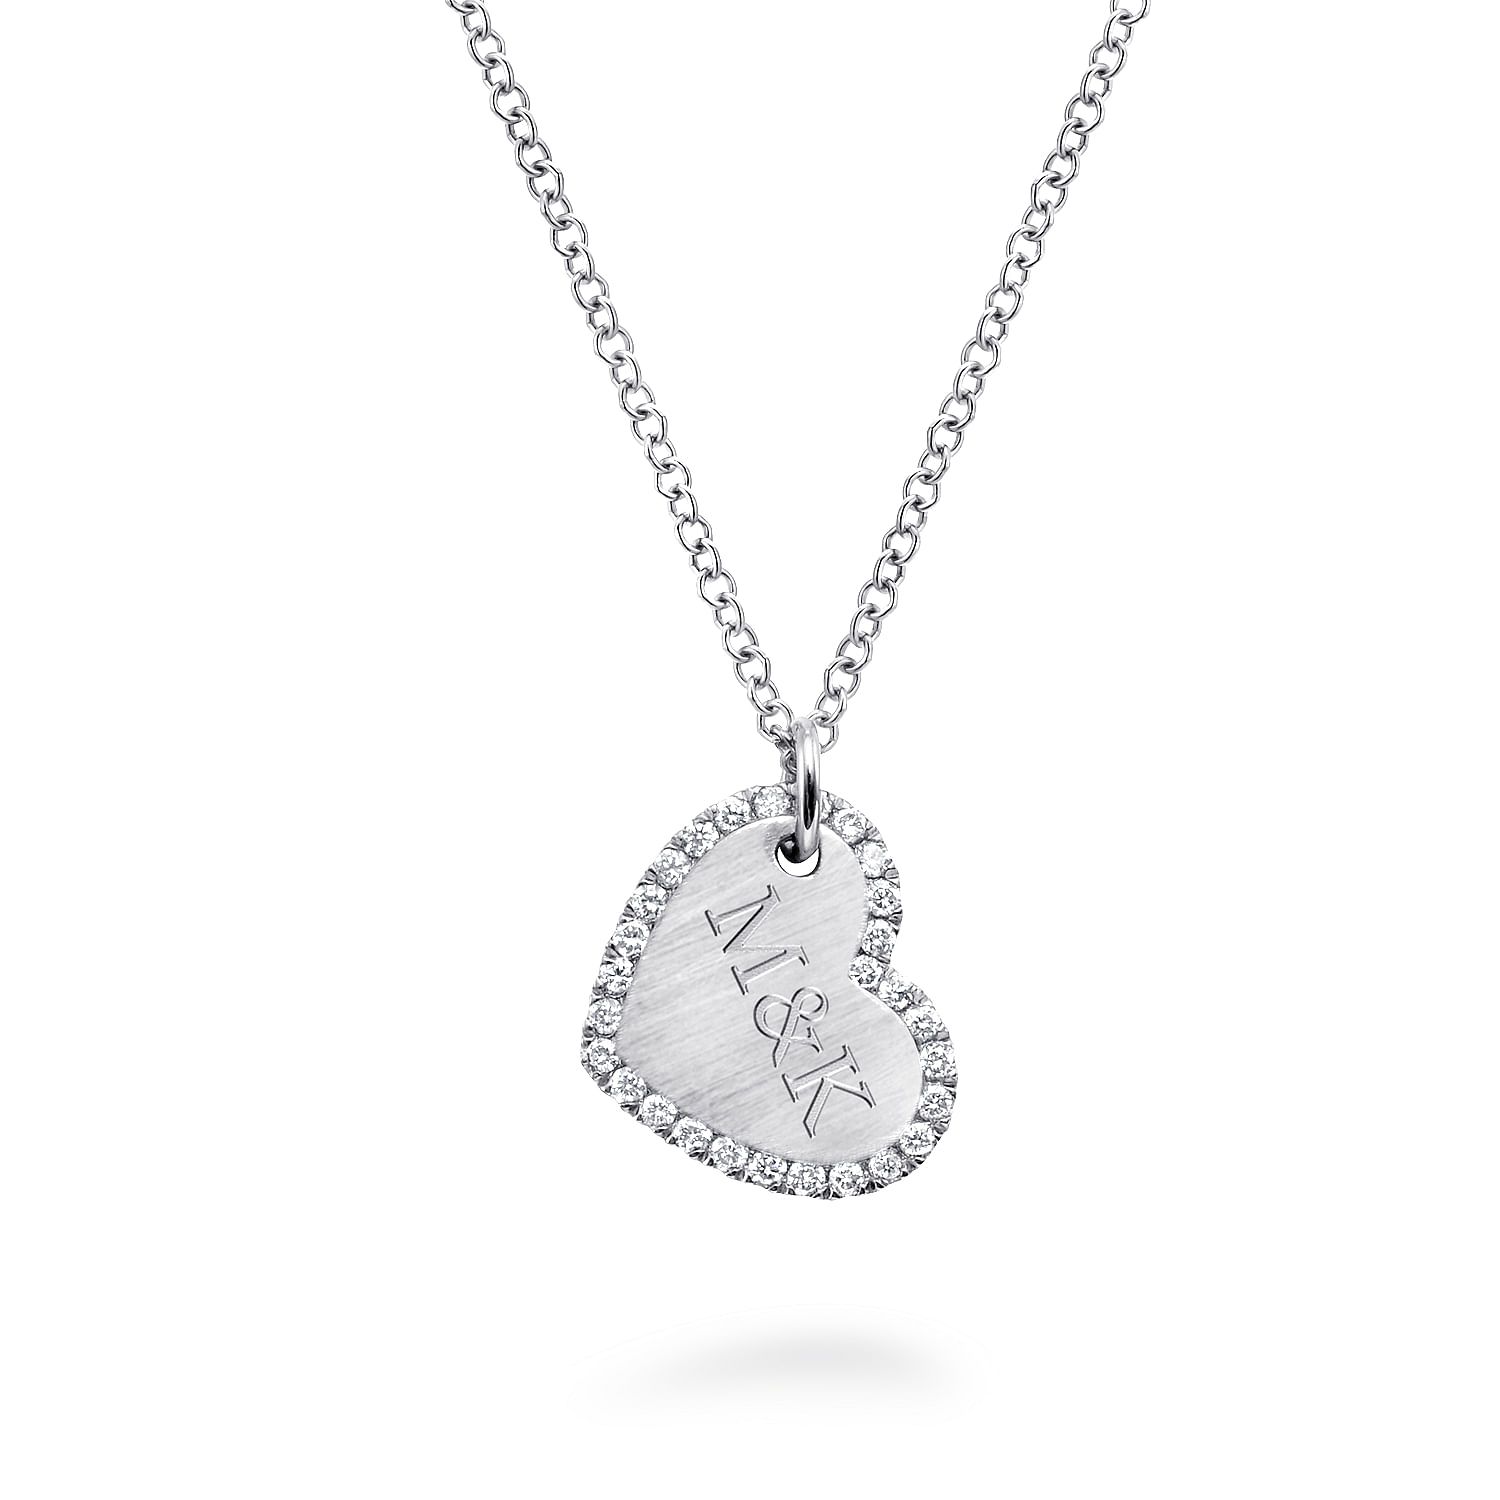 Sideways 14K White Gold Engraved Heart Pendant Necklace with Diamond Frame